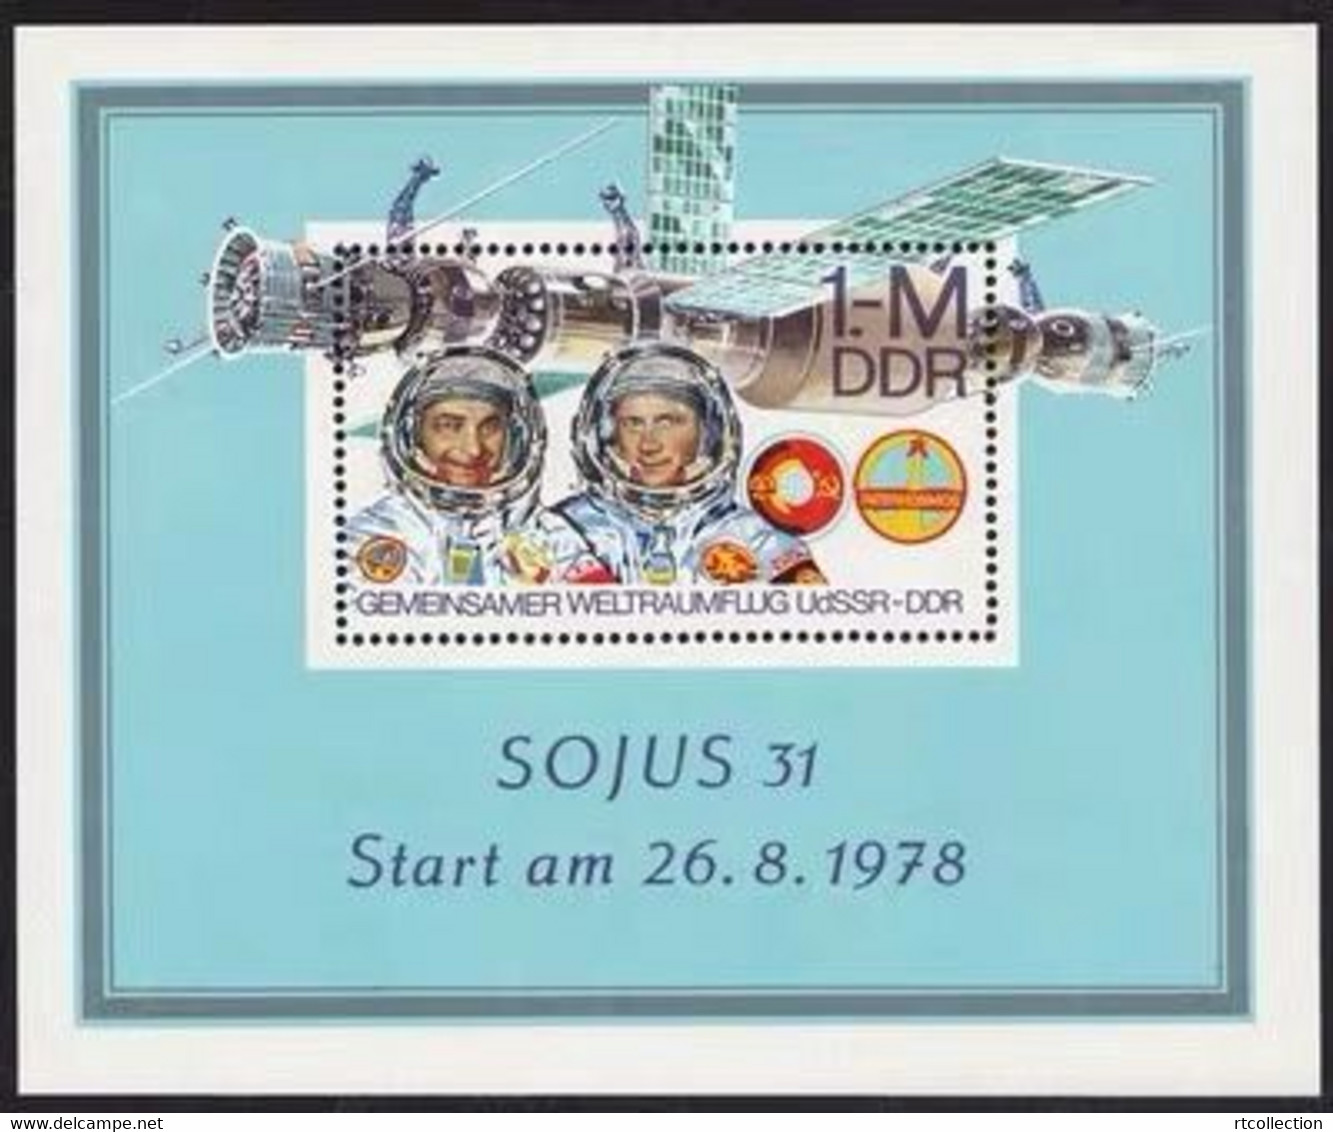 Germany 1978 DDR Space Travel Joint Flight Soviet USSR GDR Sciences People Soyuz 31 S/S Stamp MNH - Collections